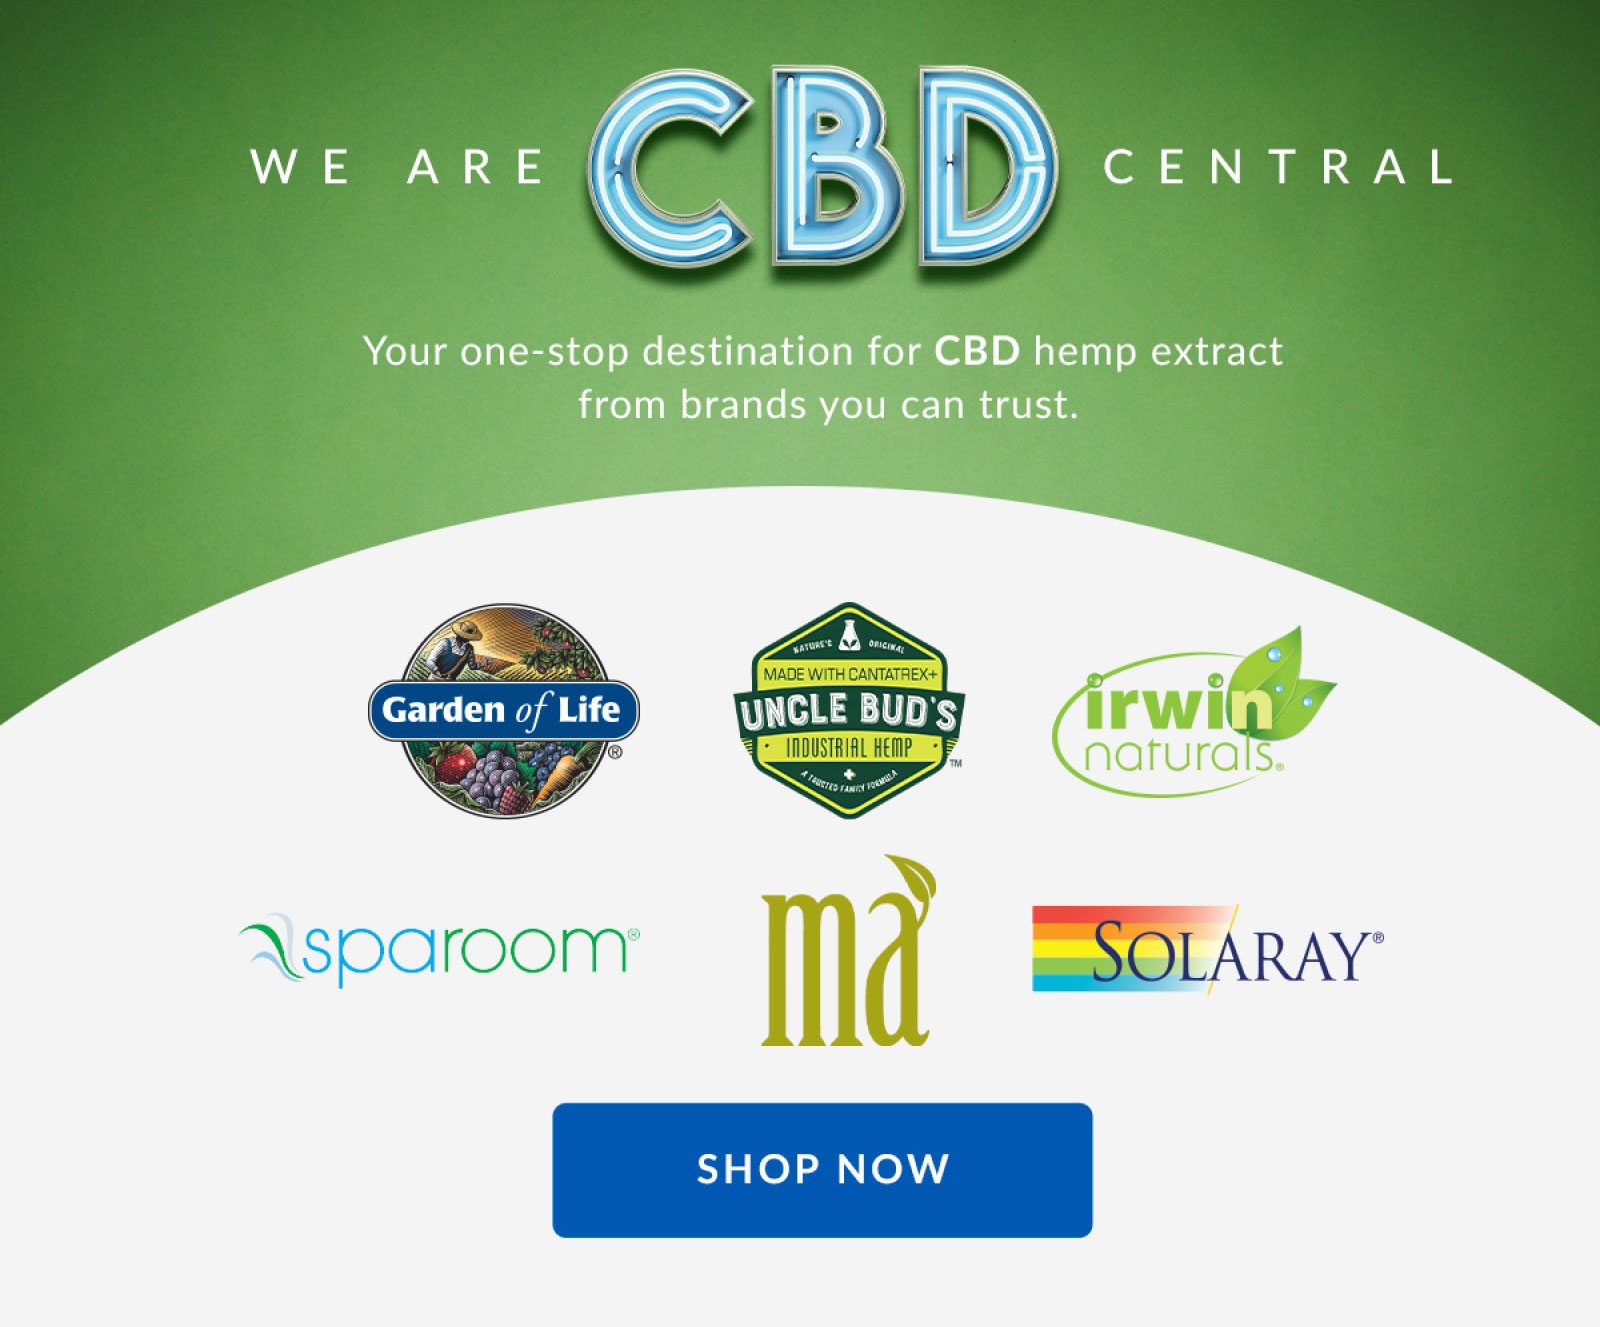 WE ARE CBD CENTRAL | Your one-stop destination for CBD hemp extract from brands you can trust. | SHOP NOW